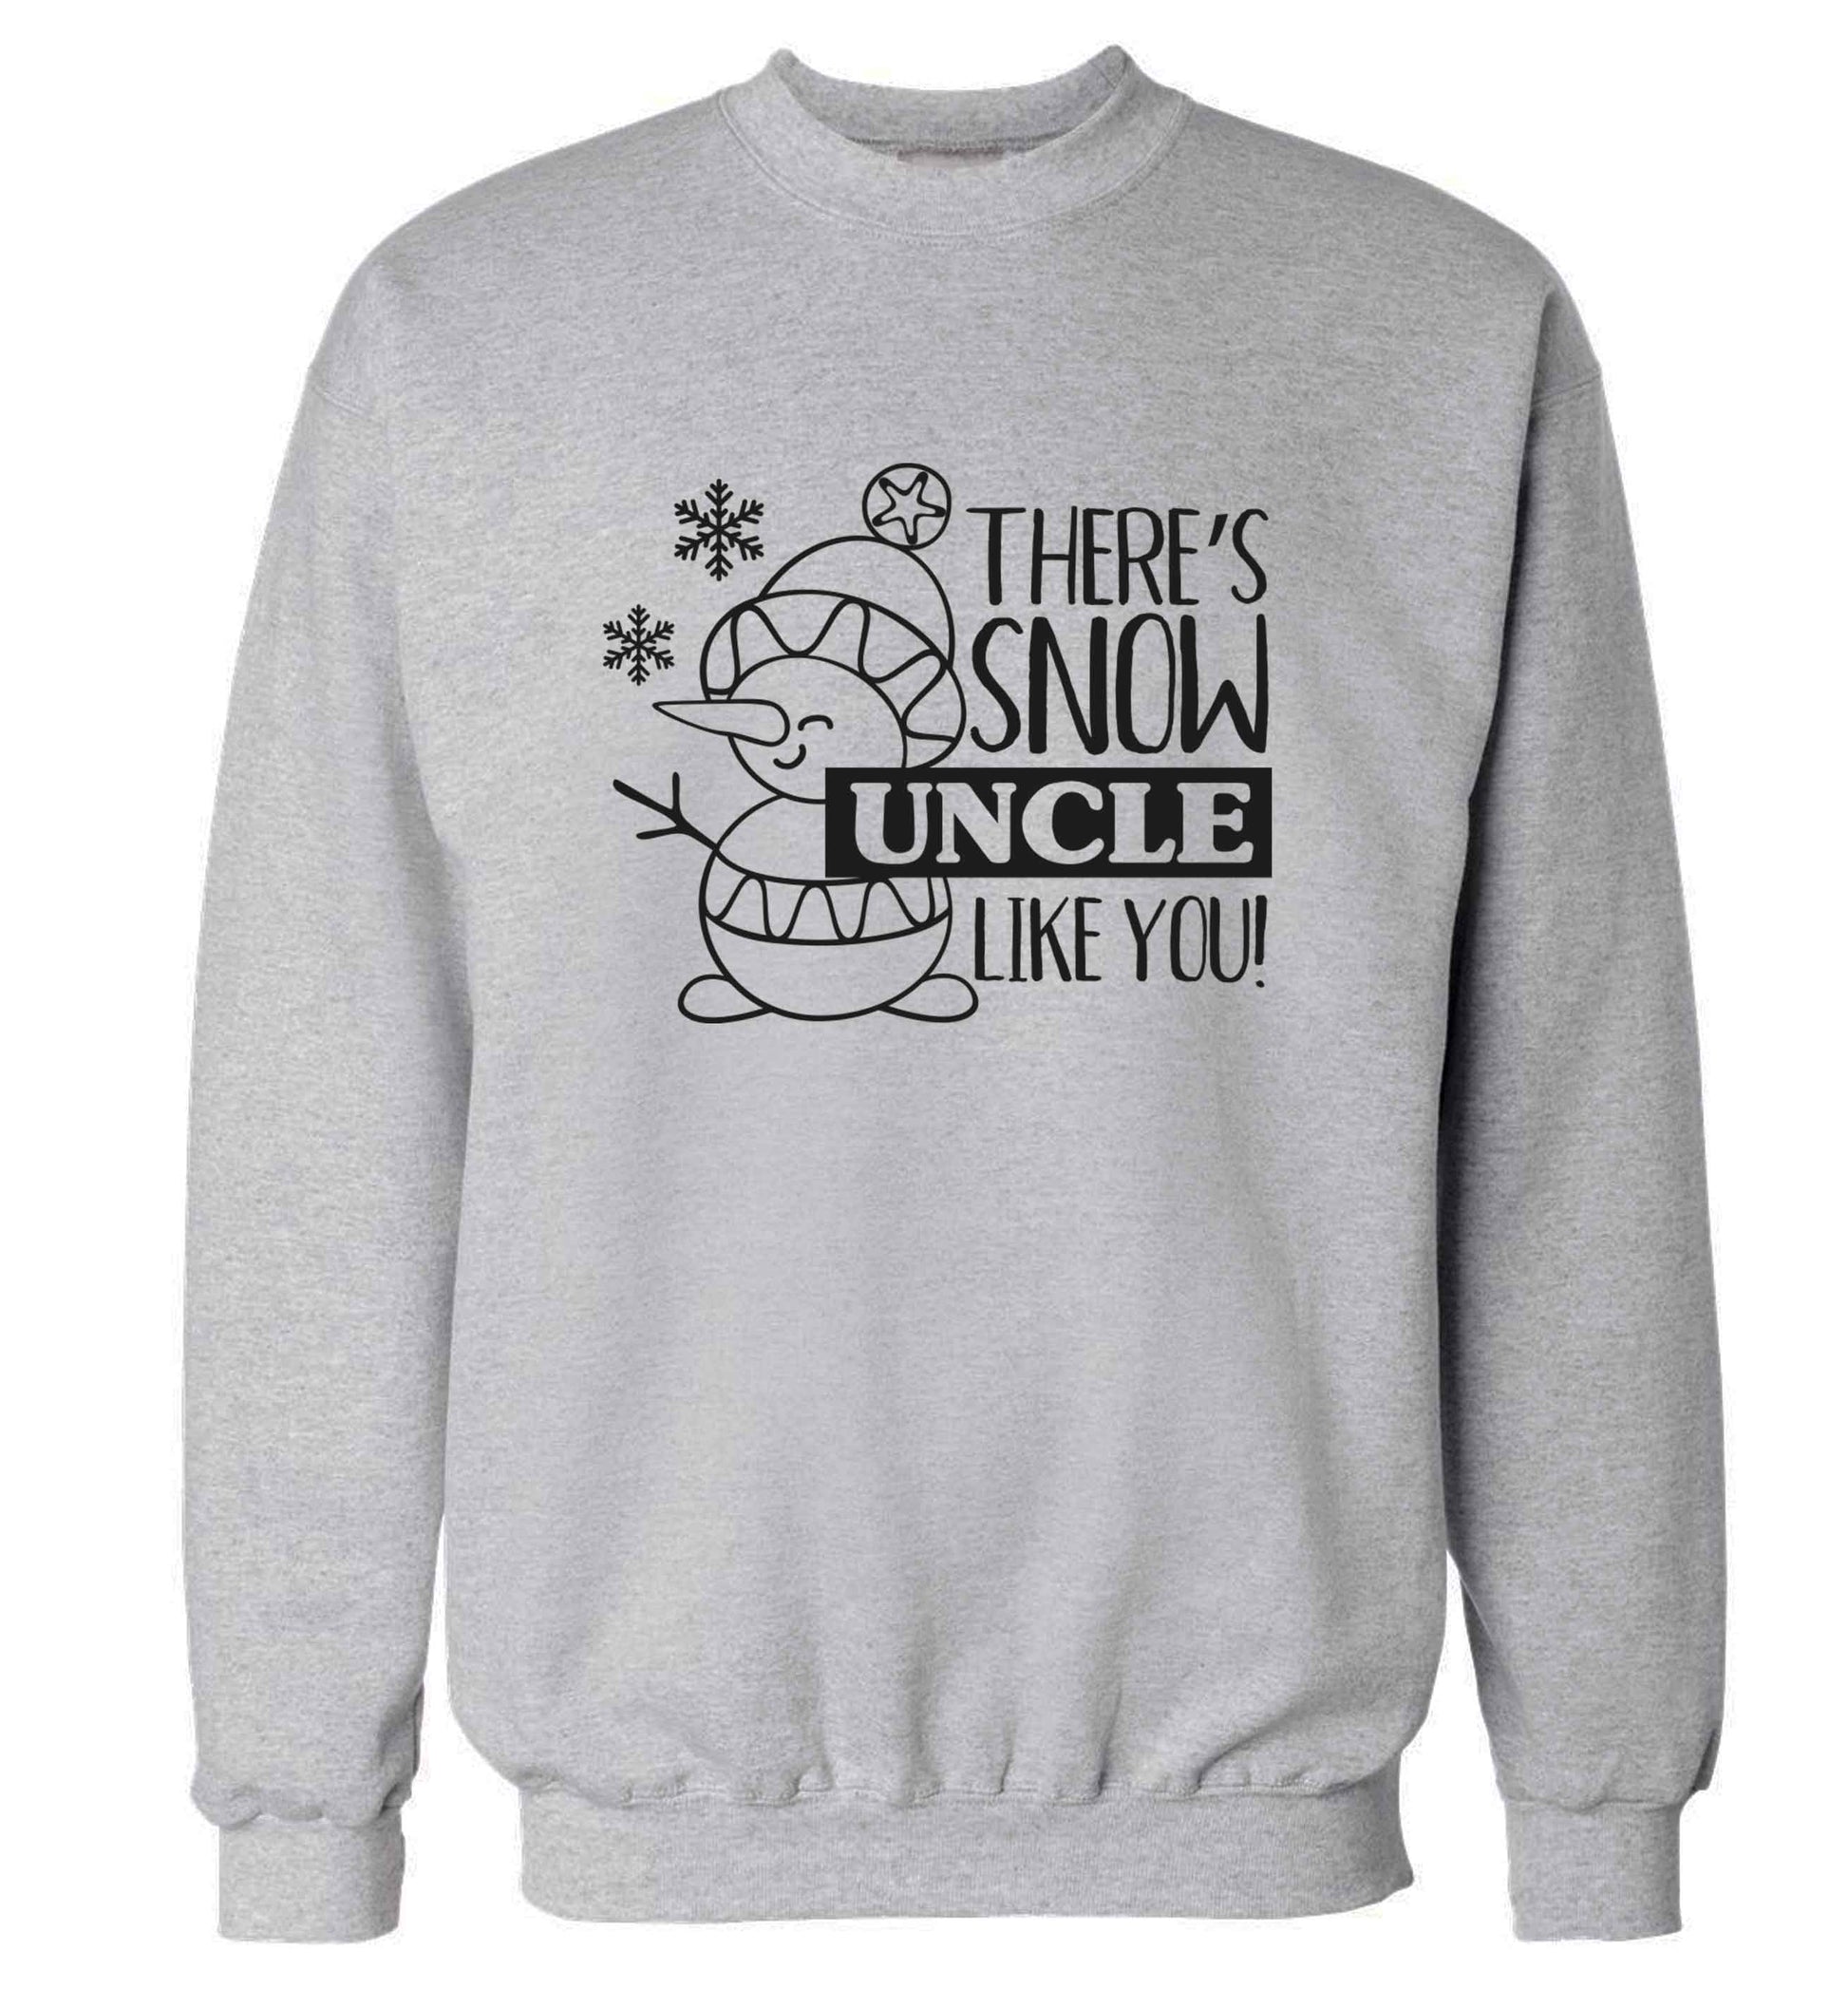 There's snow uncle like you adult's unisex grey sweater 2XL